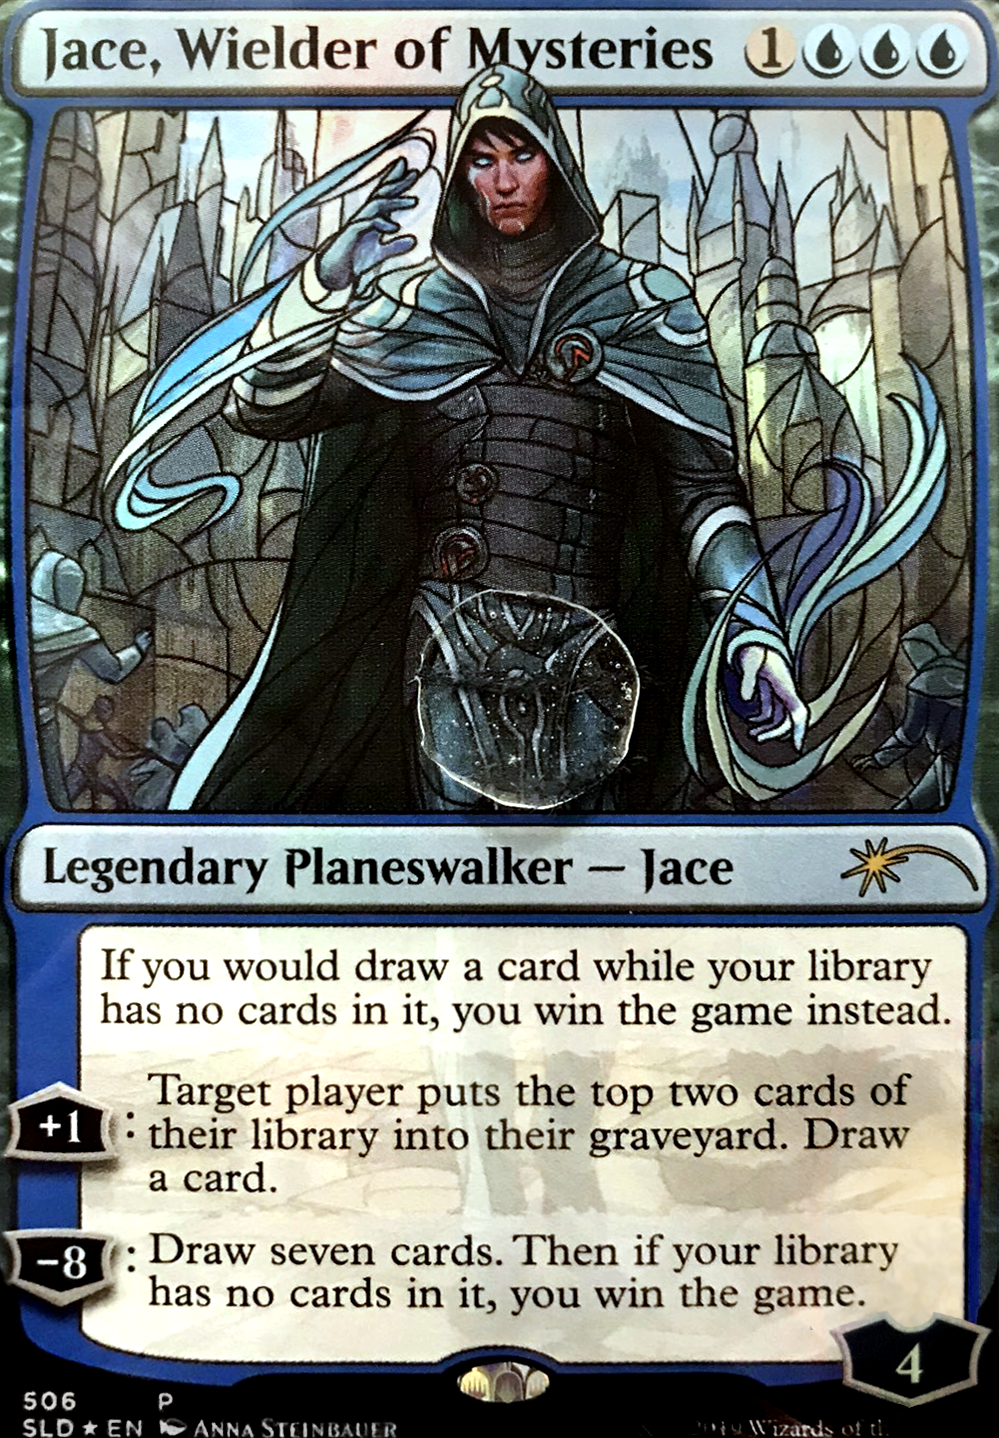 Jace, Wielder of Mysteries feature for everyone gets triggered